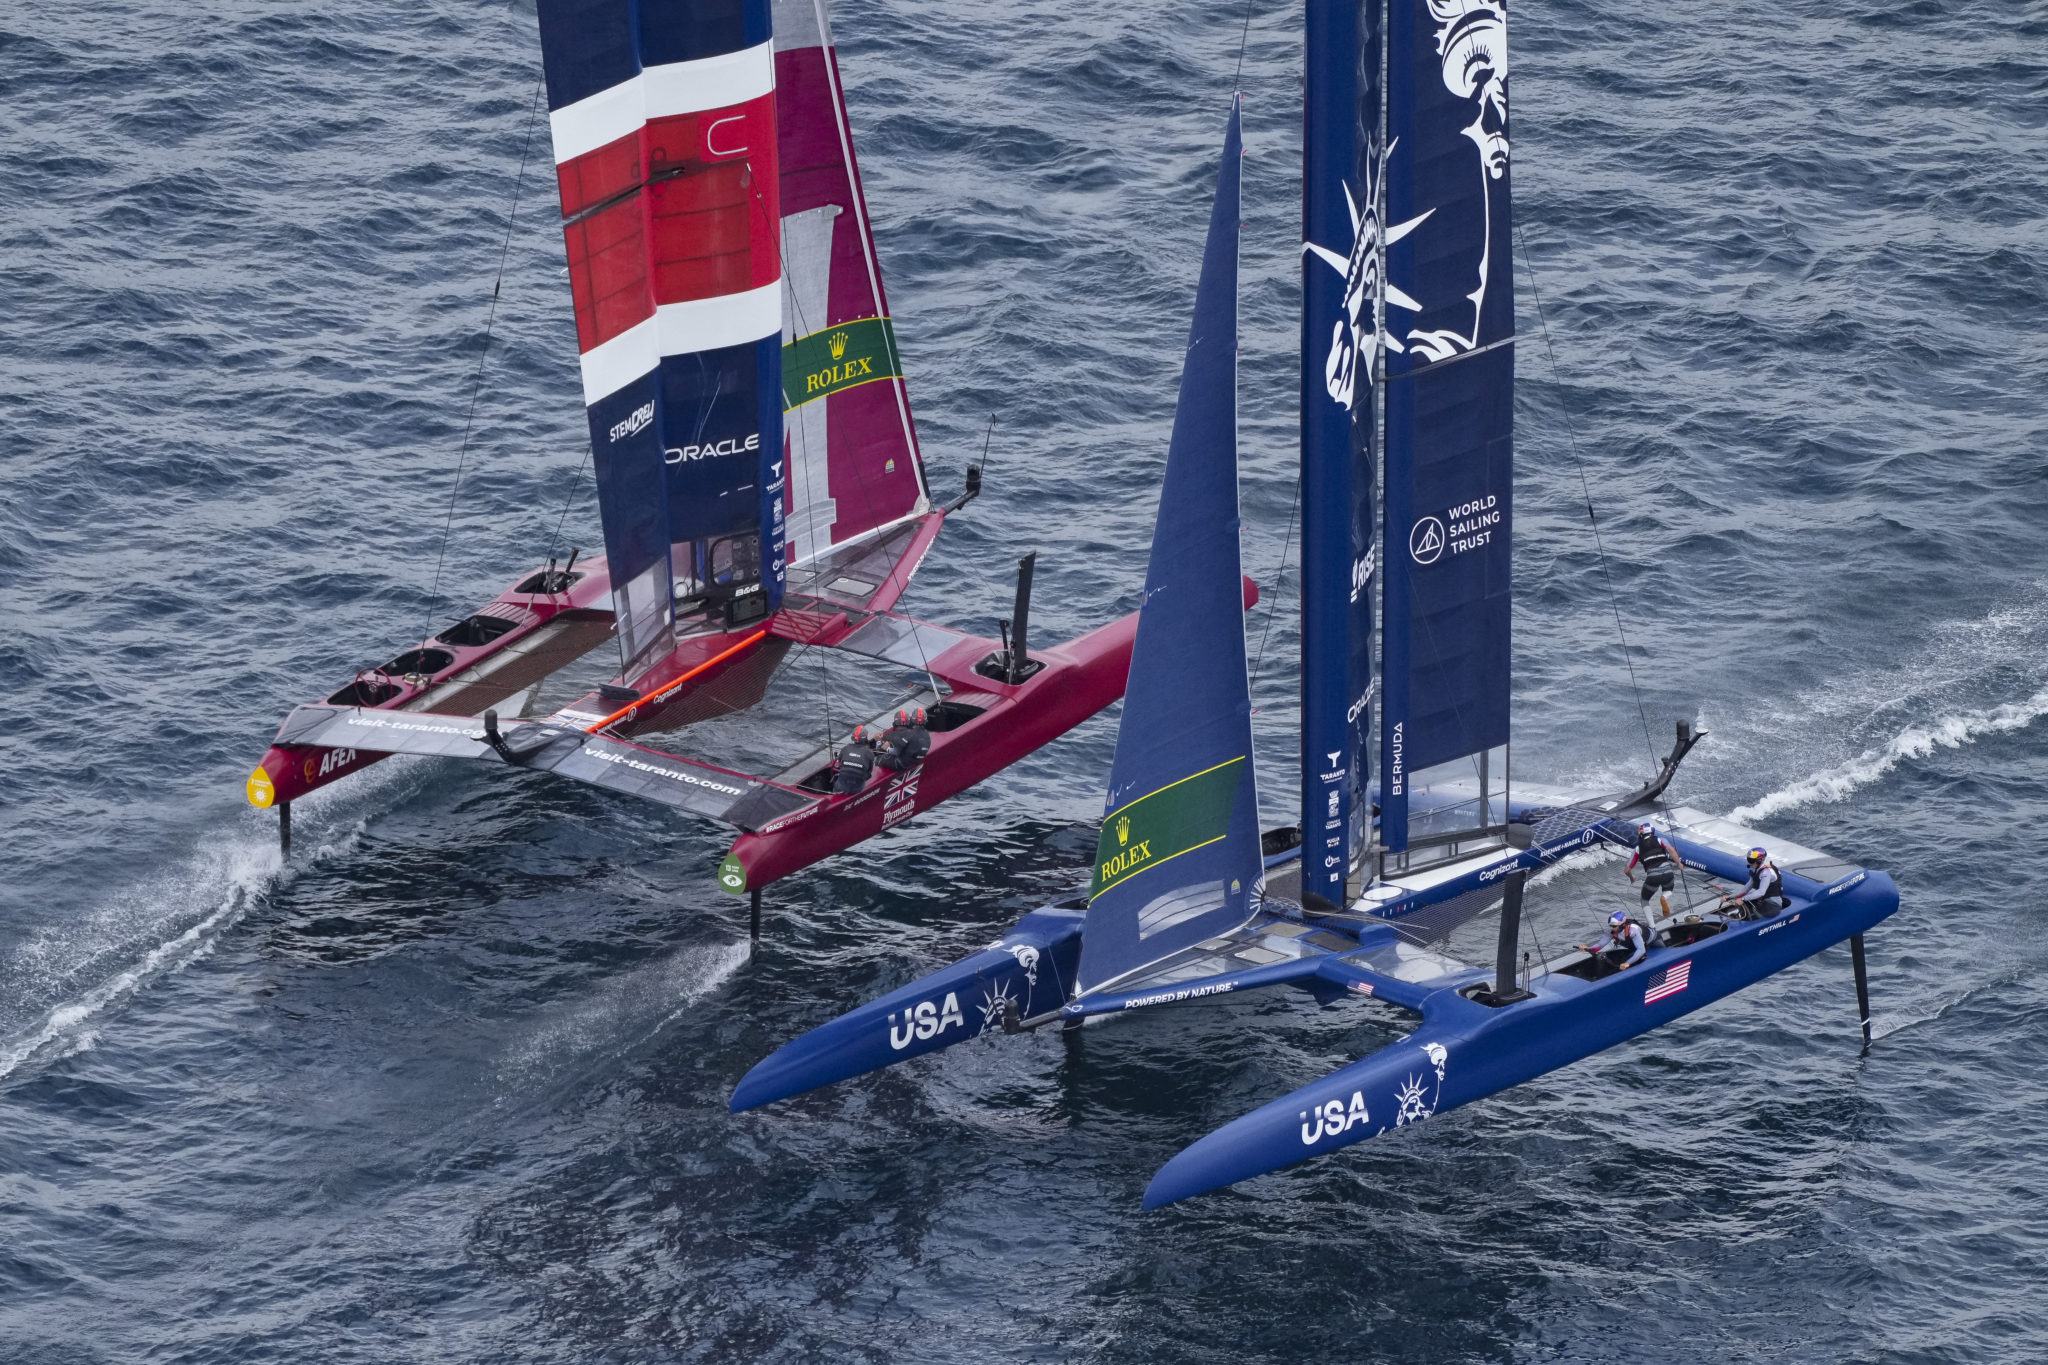 SF Bay Plays Host to SailGP’s Grand Final This Weekend Paul Duclos